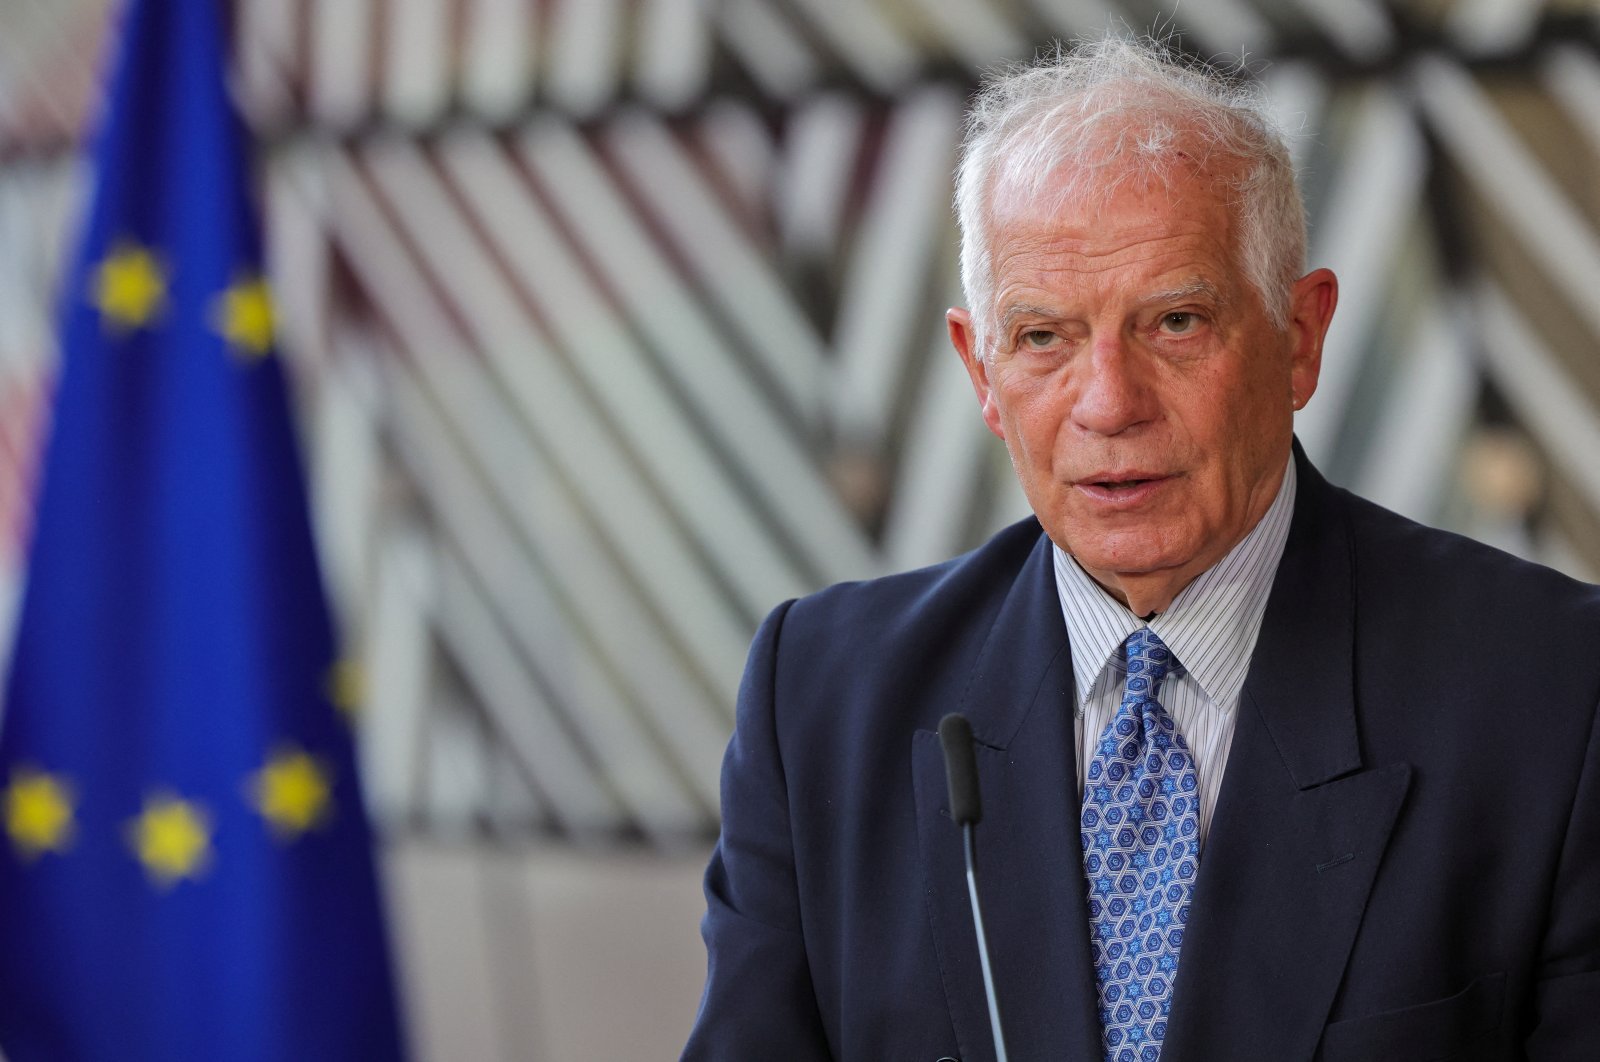 European Union High Representative for Foreign Affairs and Security Policy Josep Borrell speaks to members of the media ahead of a EU-US Energy Council Ministerial Meeting in Brussels, Belgium April 4, 2023. (Reuters Photo)